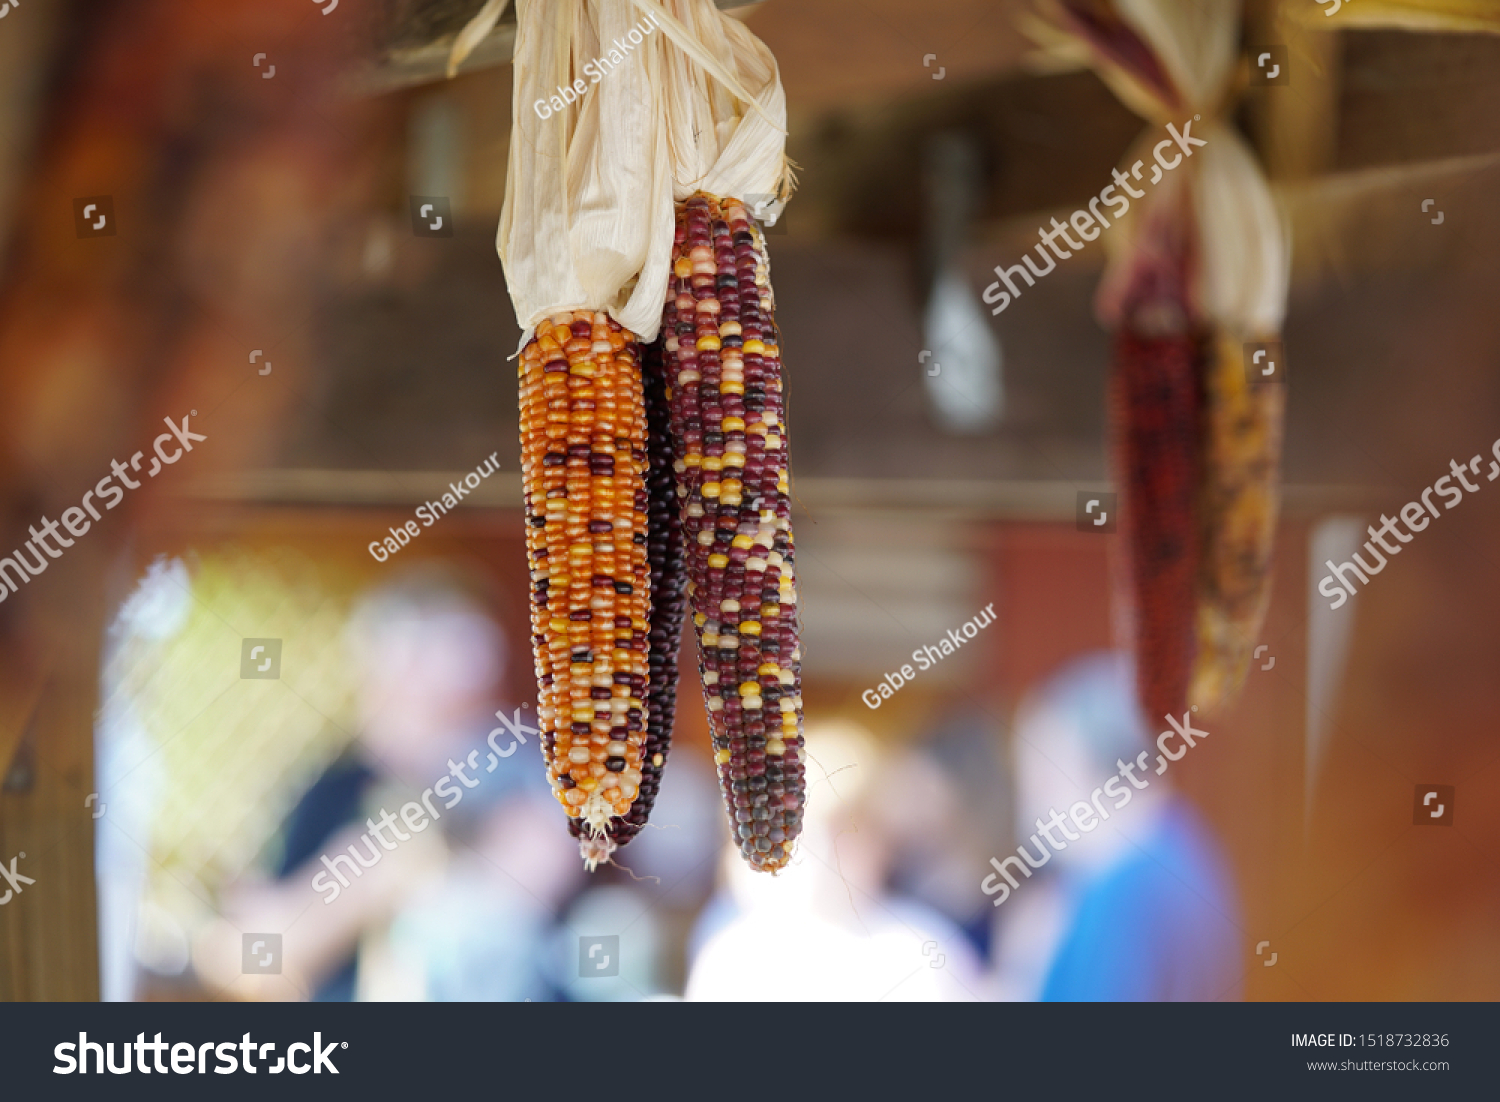 Dried Indian corn cobs with multicolored kernels hanging at farm stand market, fall harvest and autumn decorations #1518732836